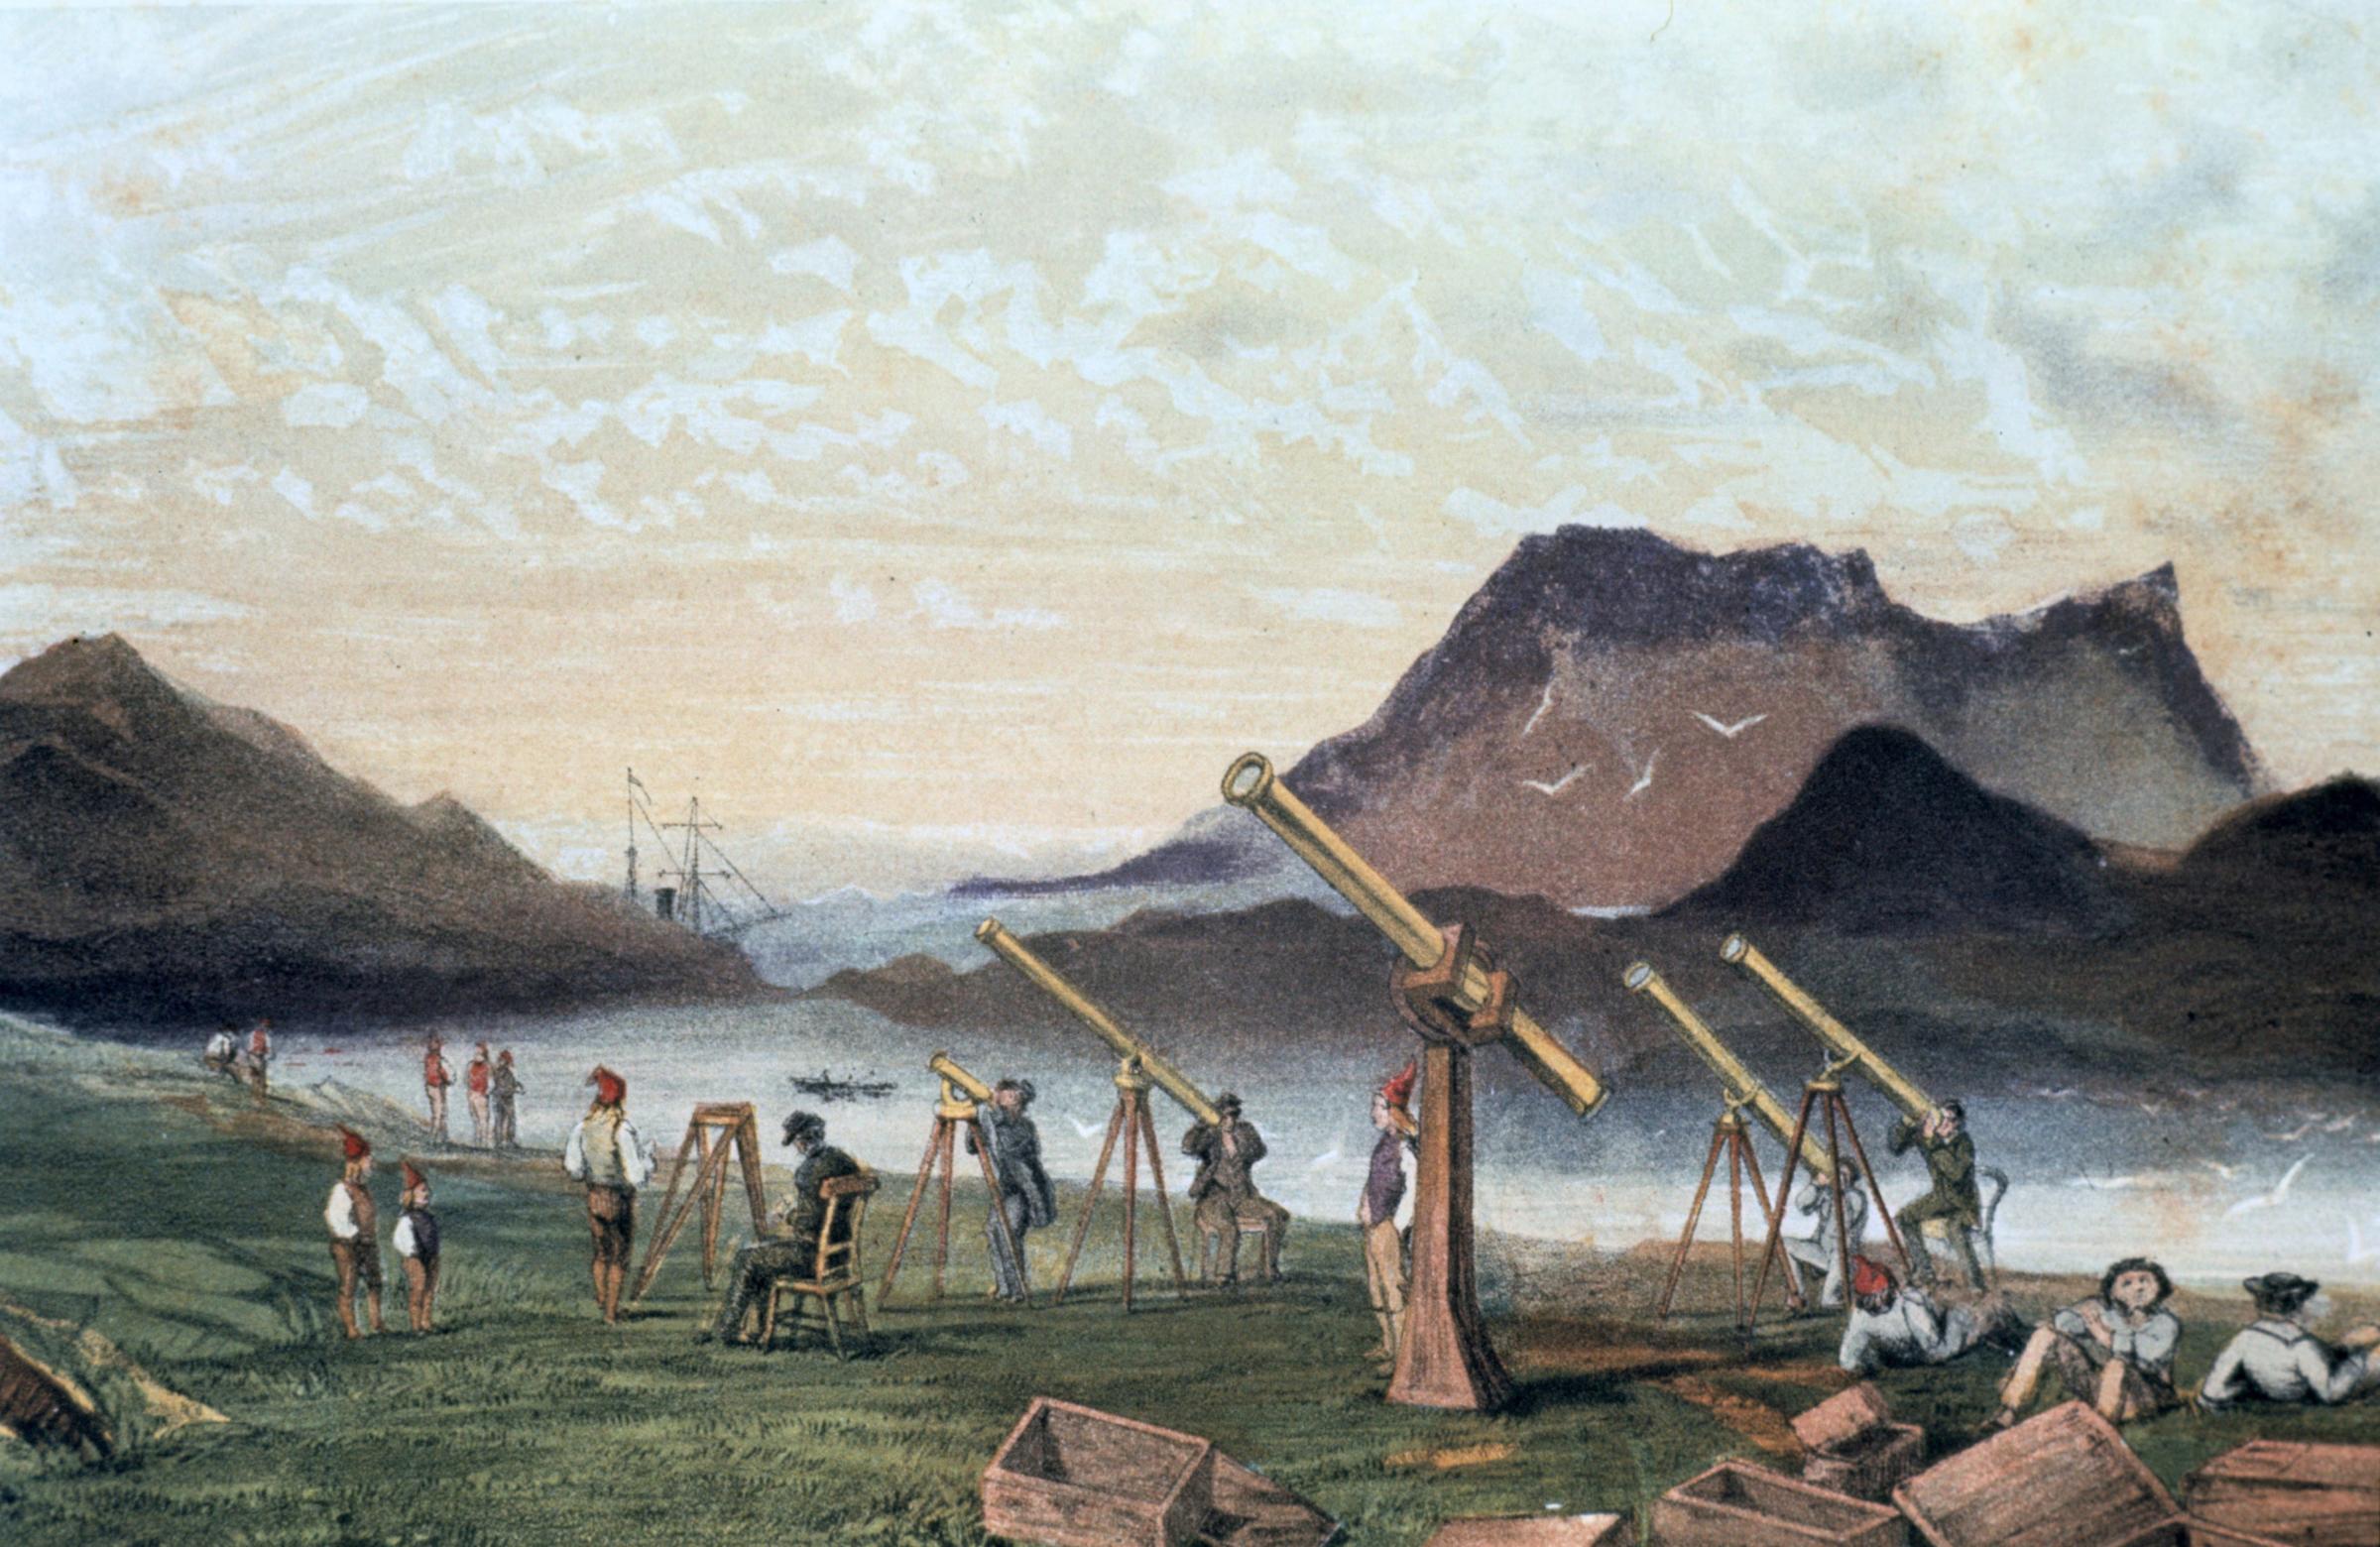 Total Solar Eclipse, 1851. Members of the Edinburgh expedition on Bue Island, Norway with their instruments set up ready for viewing the eclipse , 28 July 1851. Members of the crew from their transport vessel are seated on right by empty packing cases. Fr